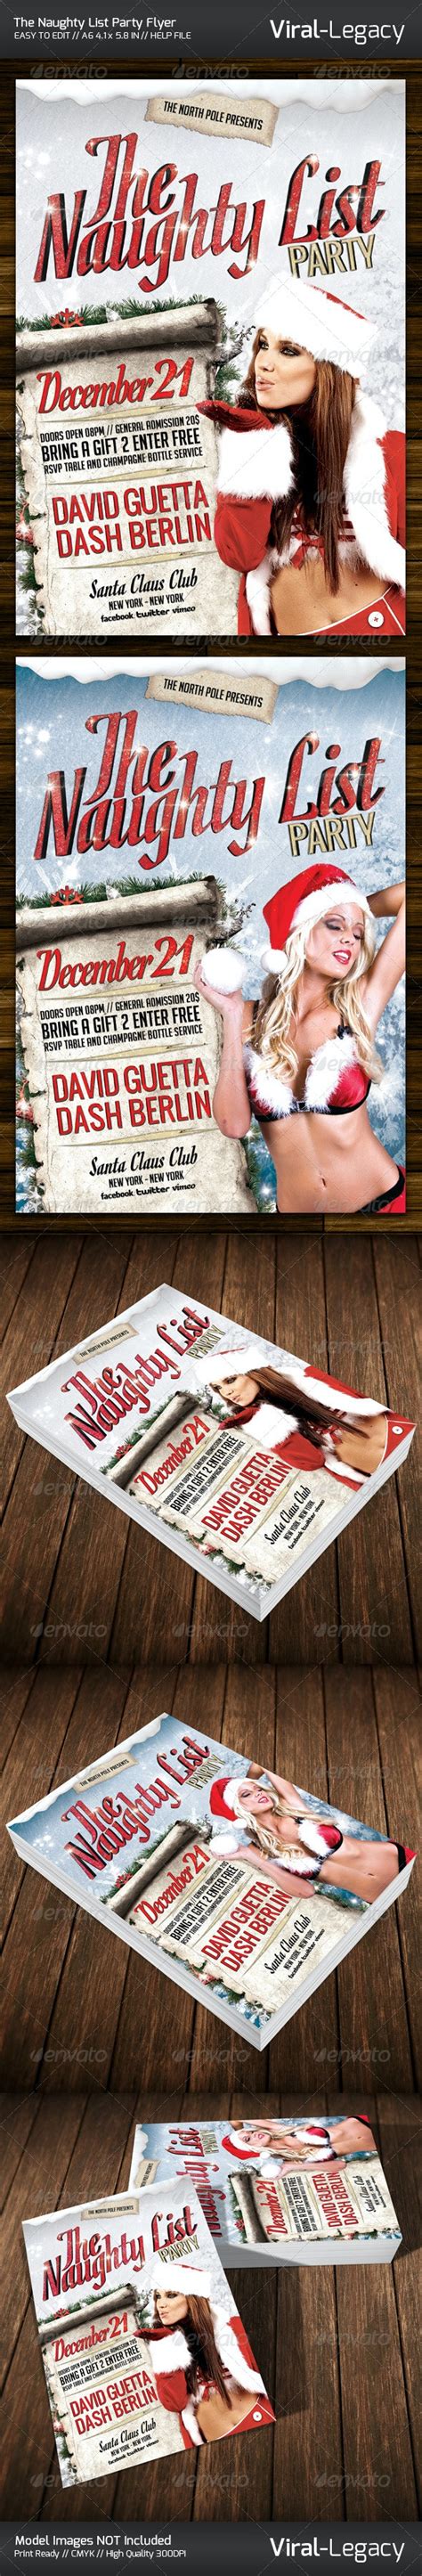 The Naughty List Party Flyer By Viral Legacy Graphicriver